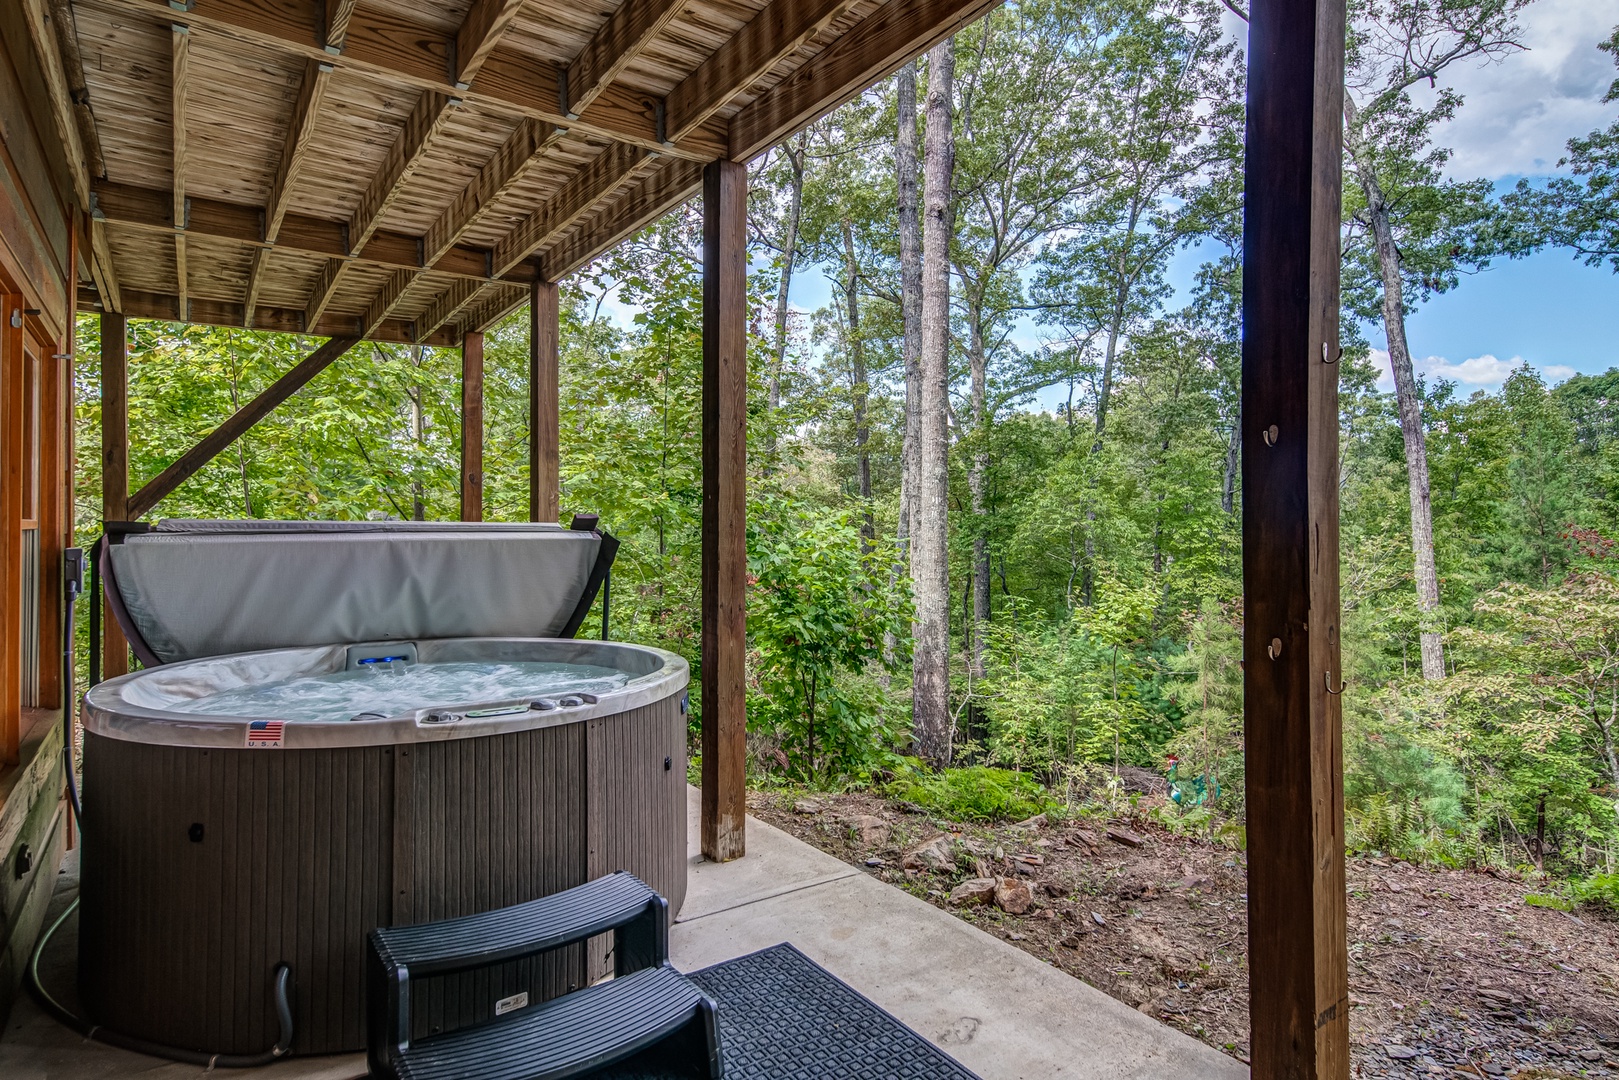 Soak all your cares away with breathtaking views in the private hot tub